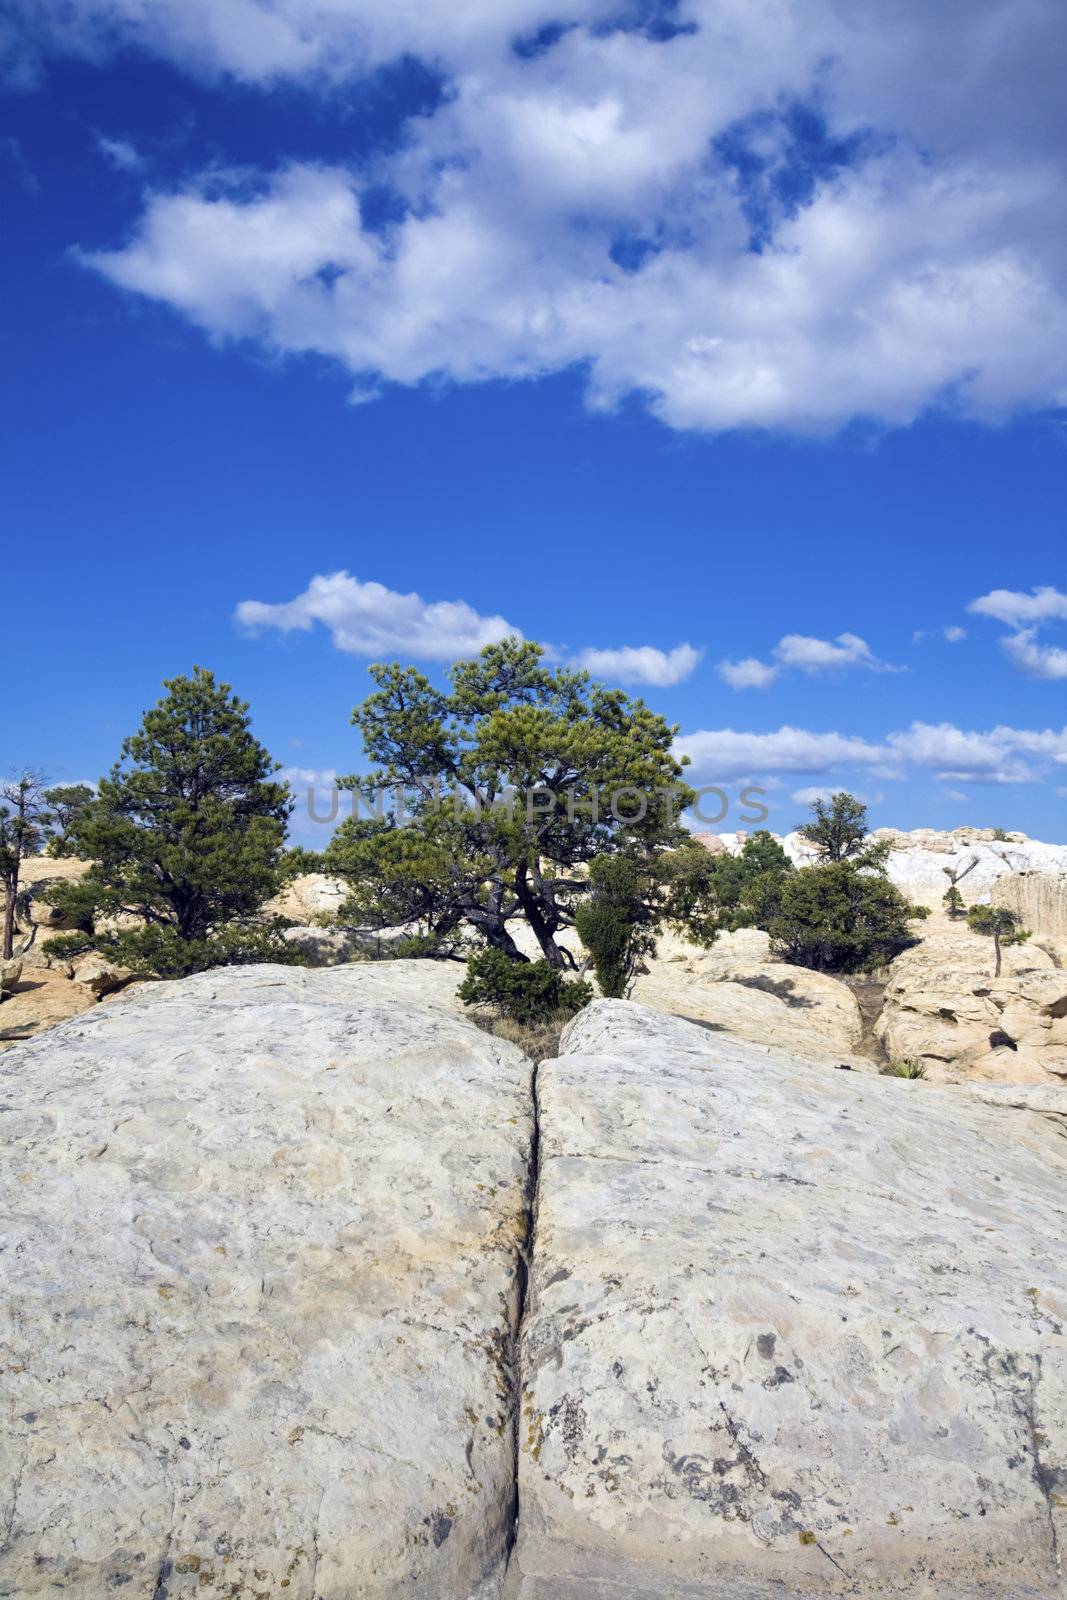 Cheecks Rock in El Morro National Monument by benkrut